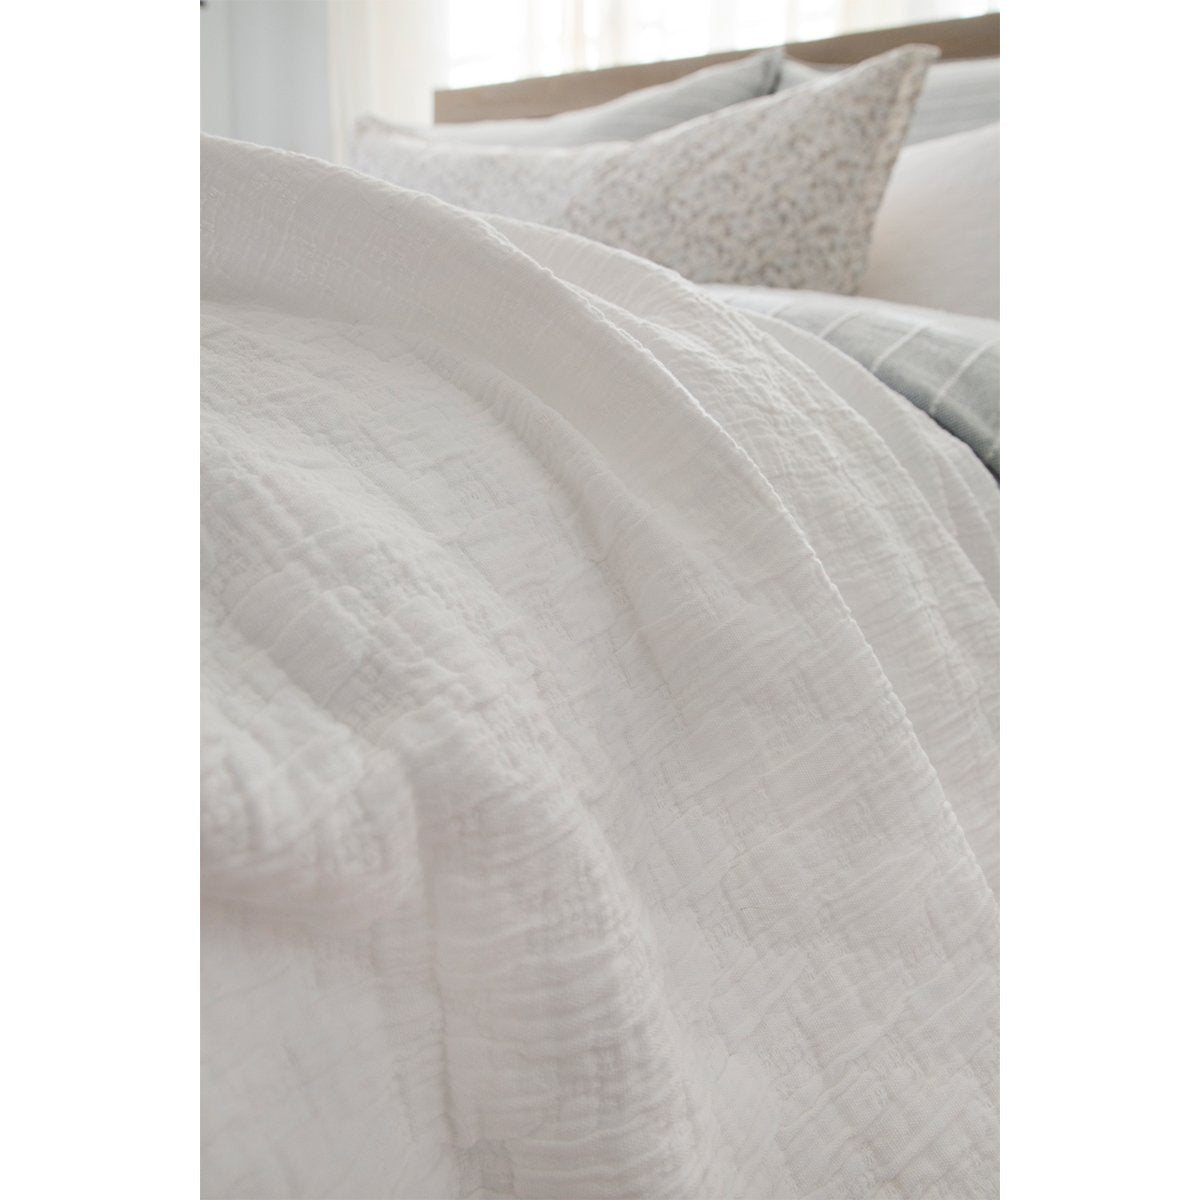 Crafted in Portugal, the Ojai matelasse by Pom Pom at Home is light and casual, bringing comfort with its subtle diamond pattern. The coziest bedding to climb into after a long day.   100% cotton. Machine wash cold; tumble dry low; warm iron as needed. Do not bleach 